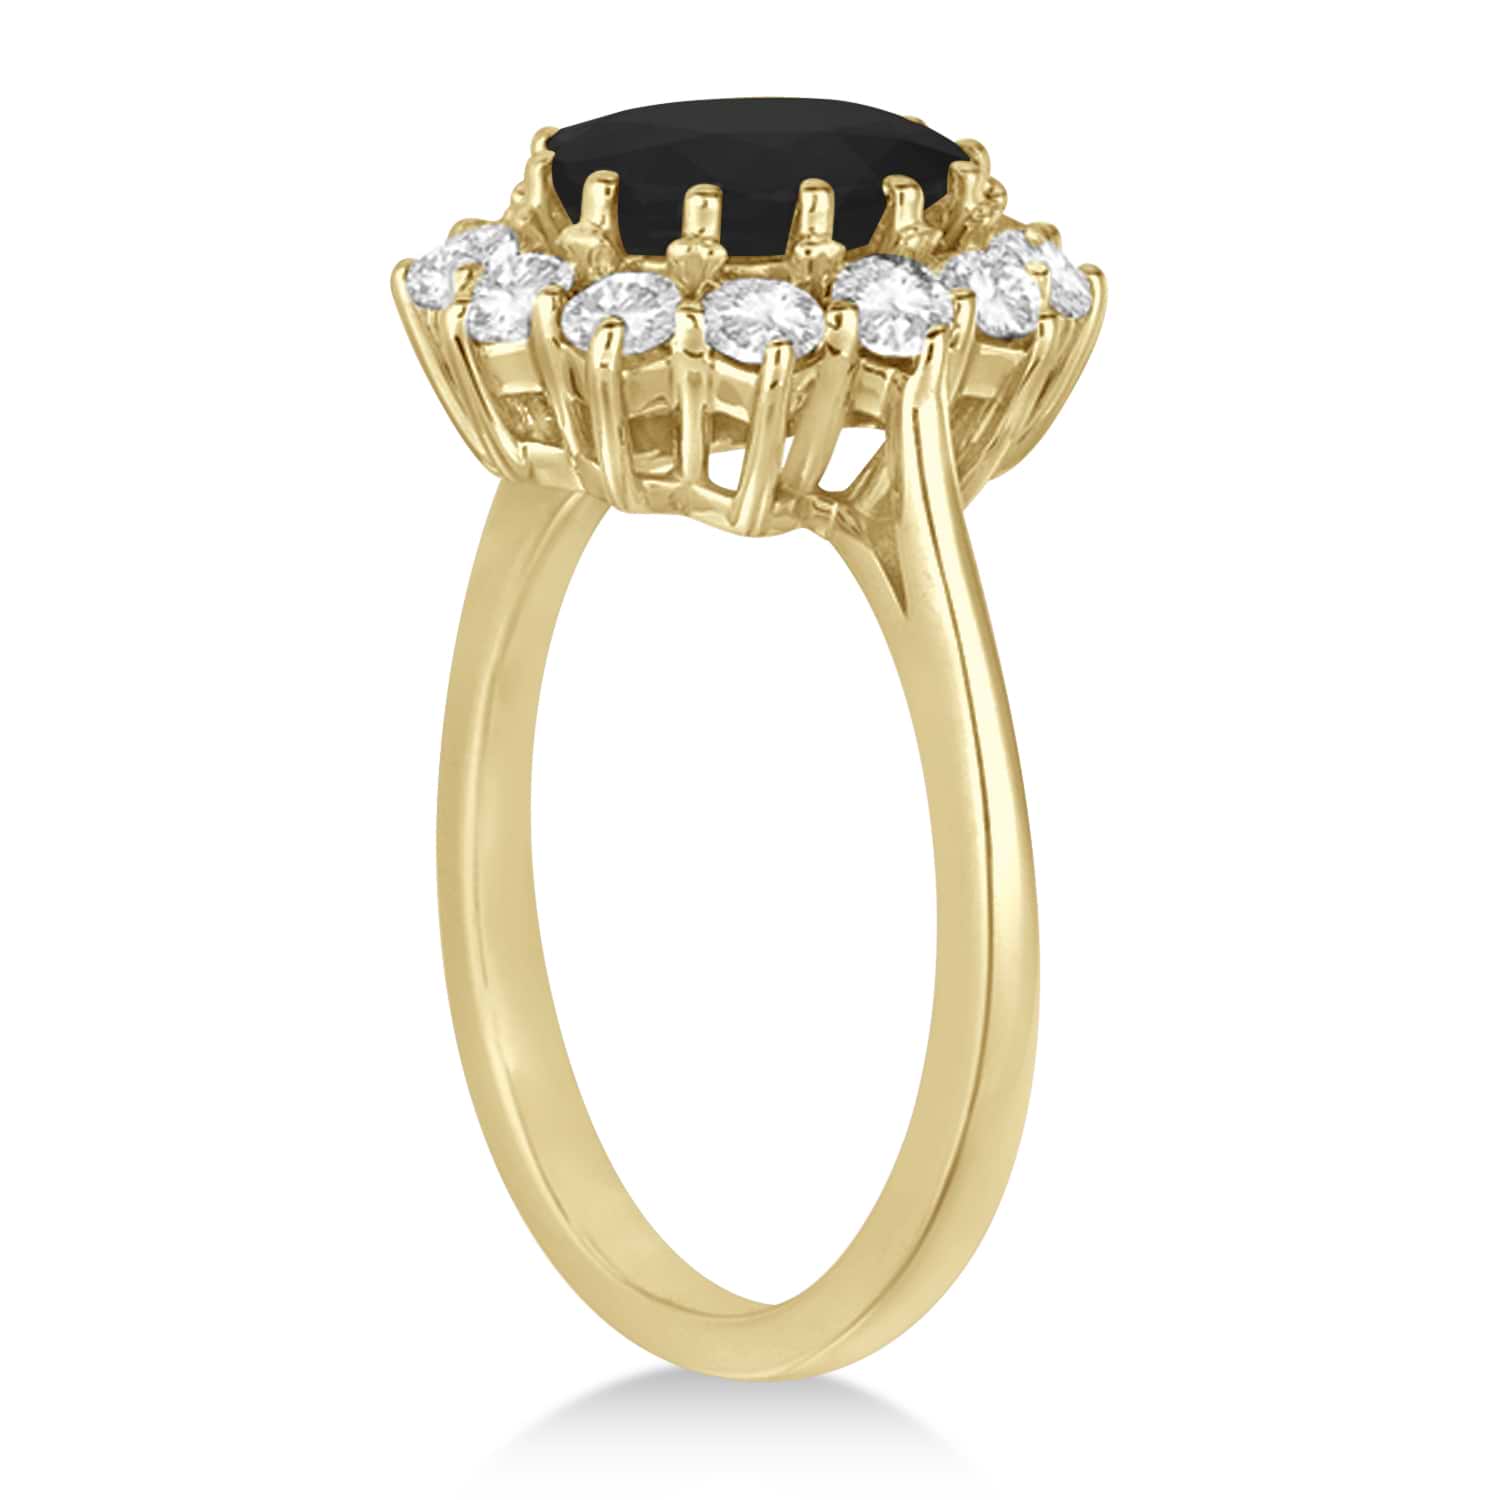 Oval Black & White Diamond Accented Ring 18k Yellow Gold (2.80ctw)